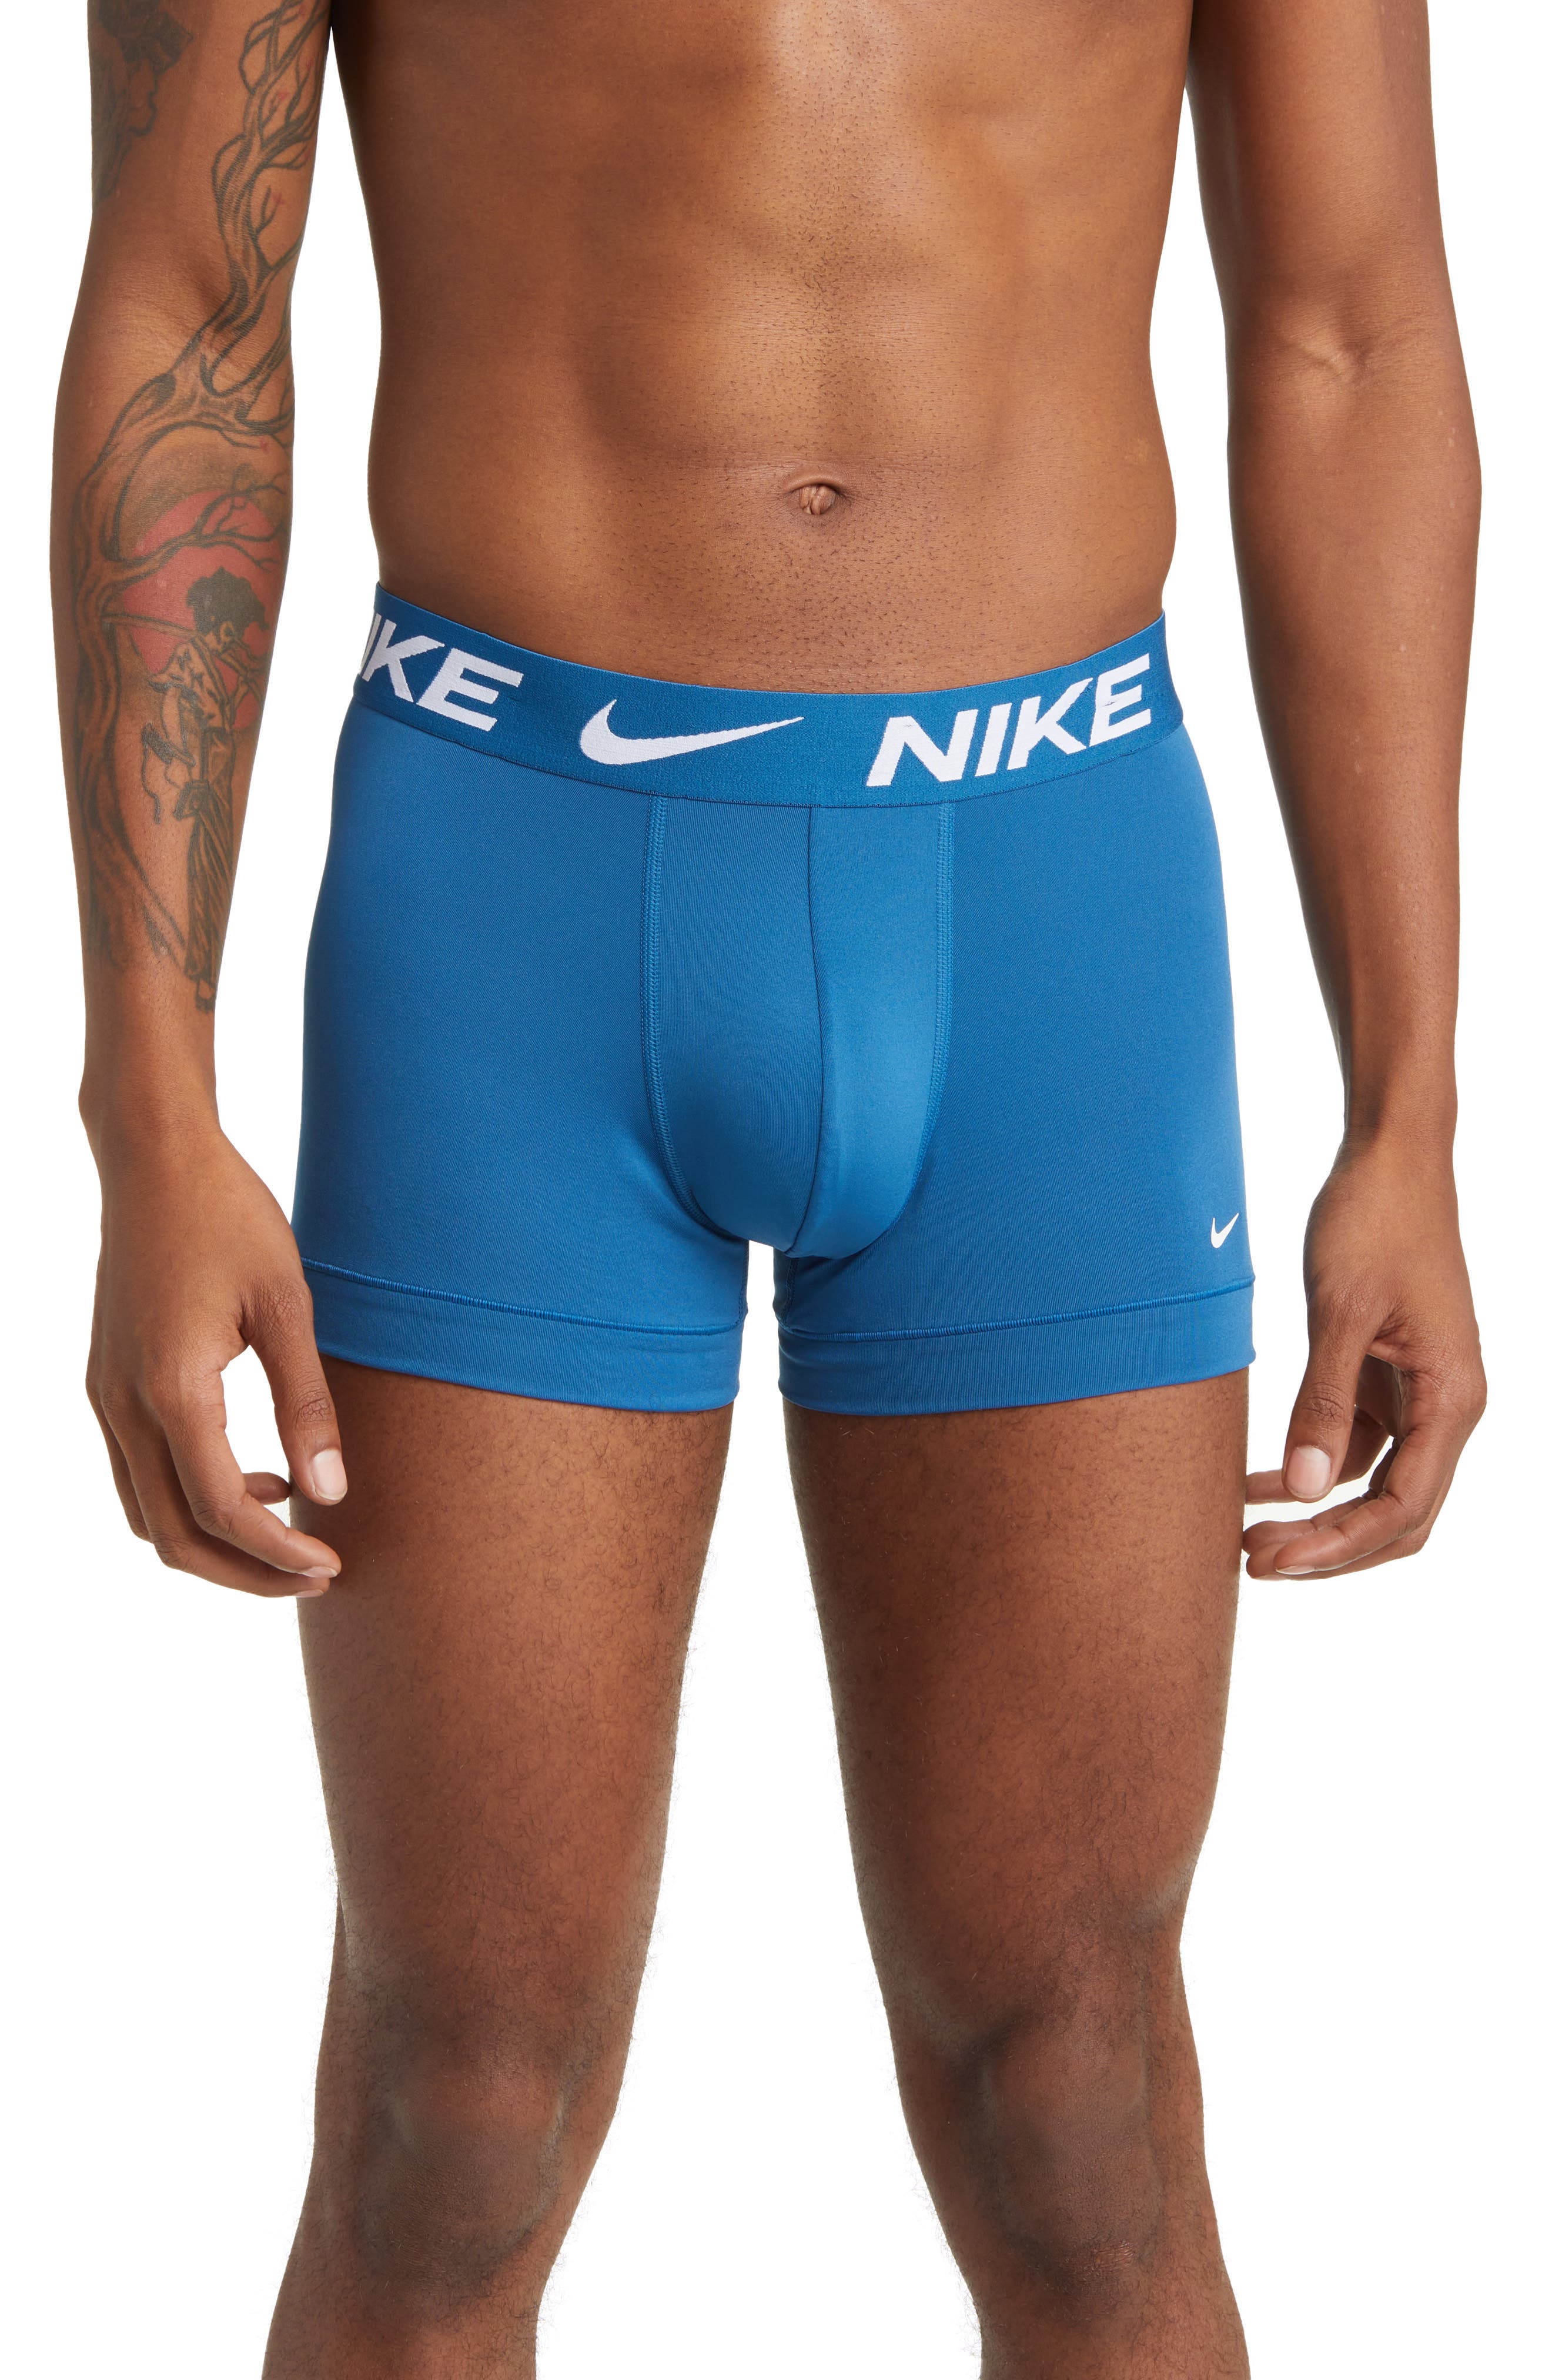 Boxer shorts Nike Ultra Stretch Micro Dri-FIT Boxer 3-Pack Crackle